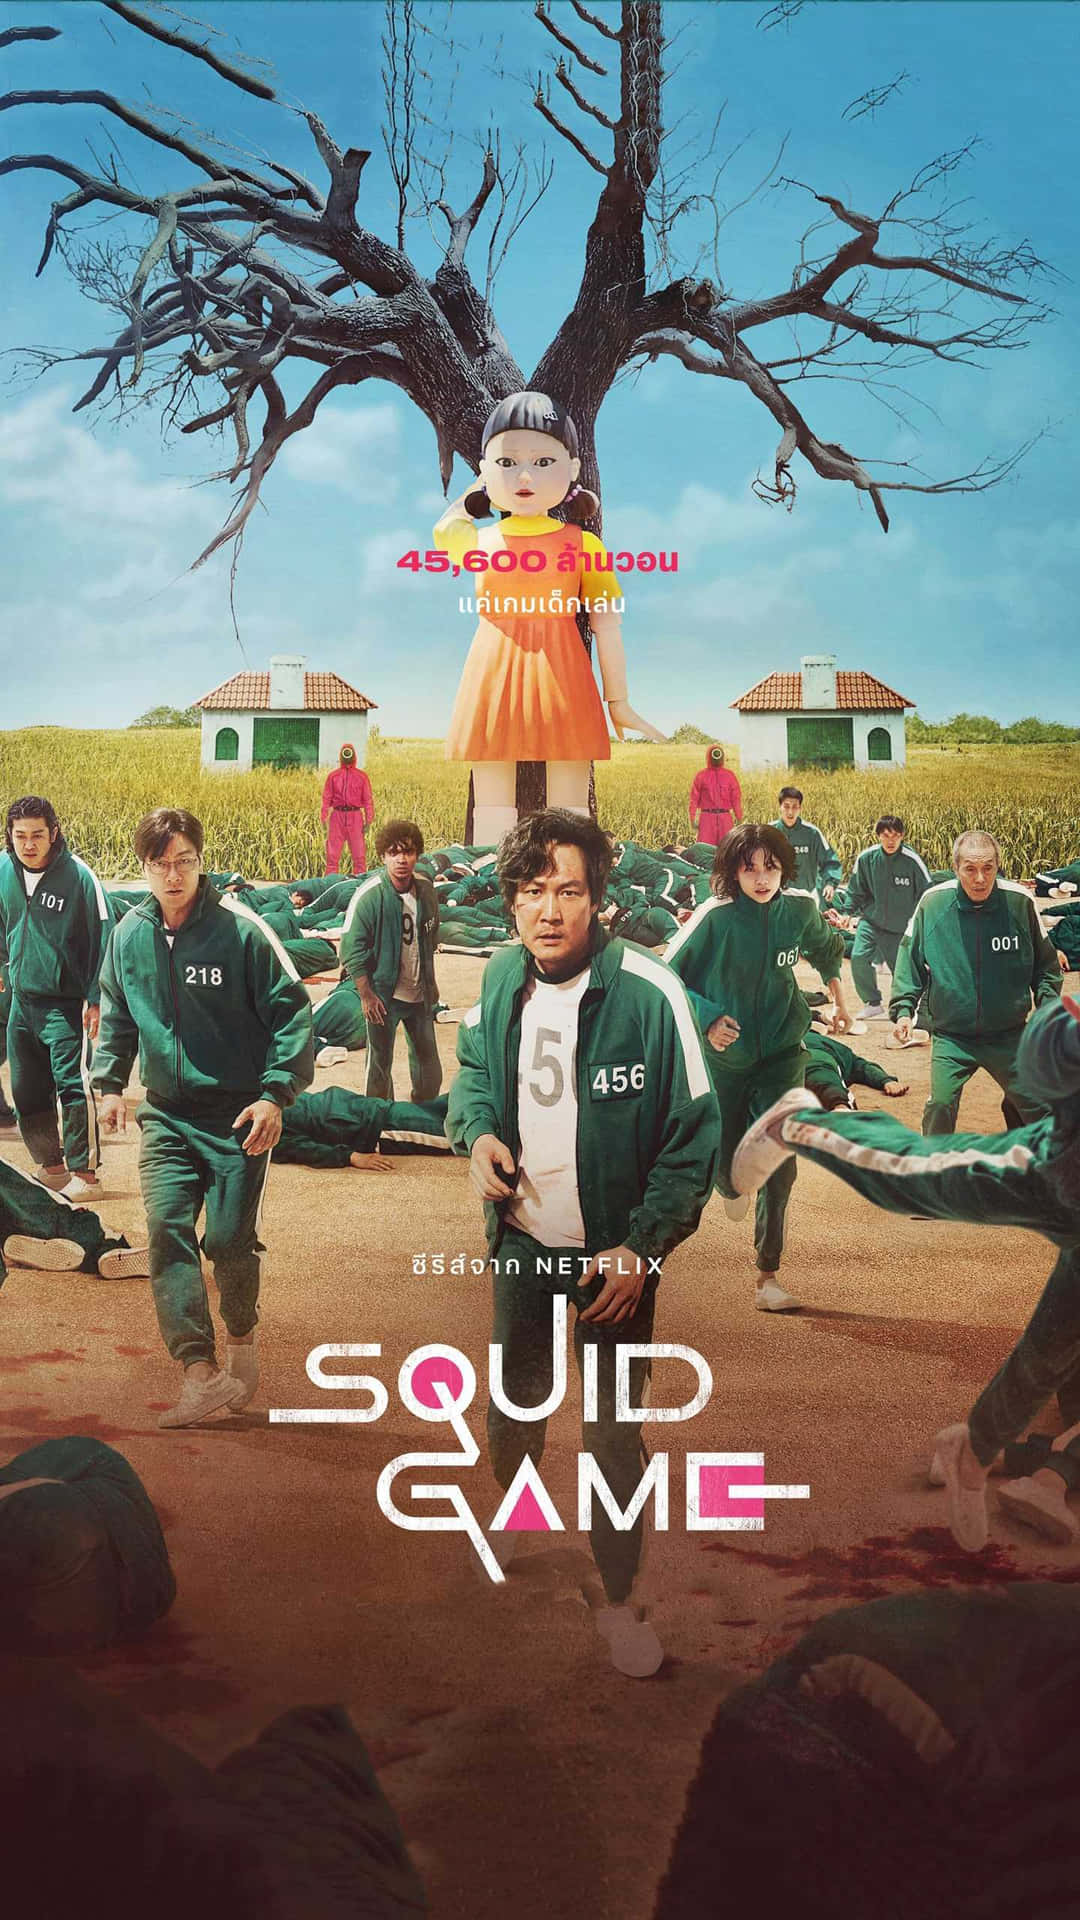 The Squid Game poster showing a man standing in front of a crowd, a knife in his hand. - Squid Game